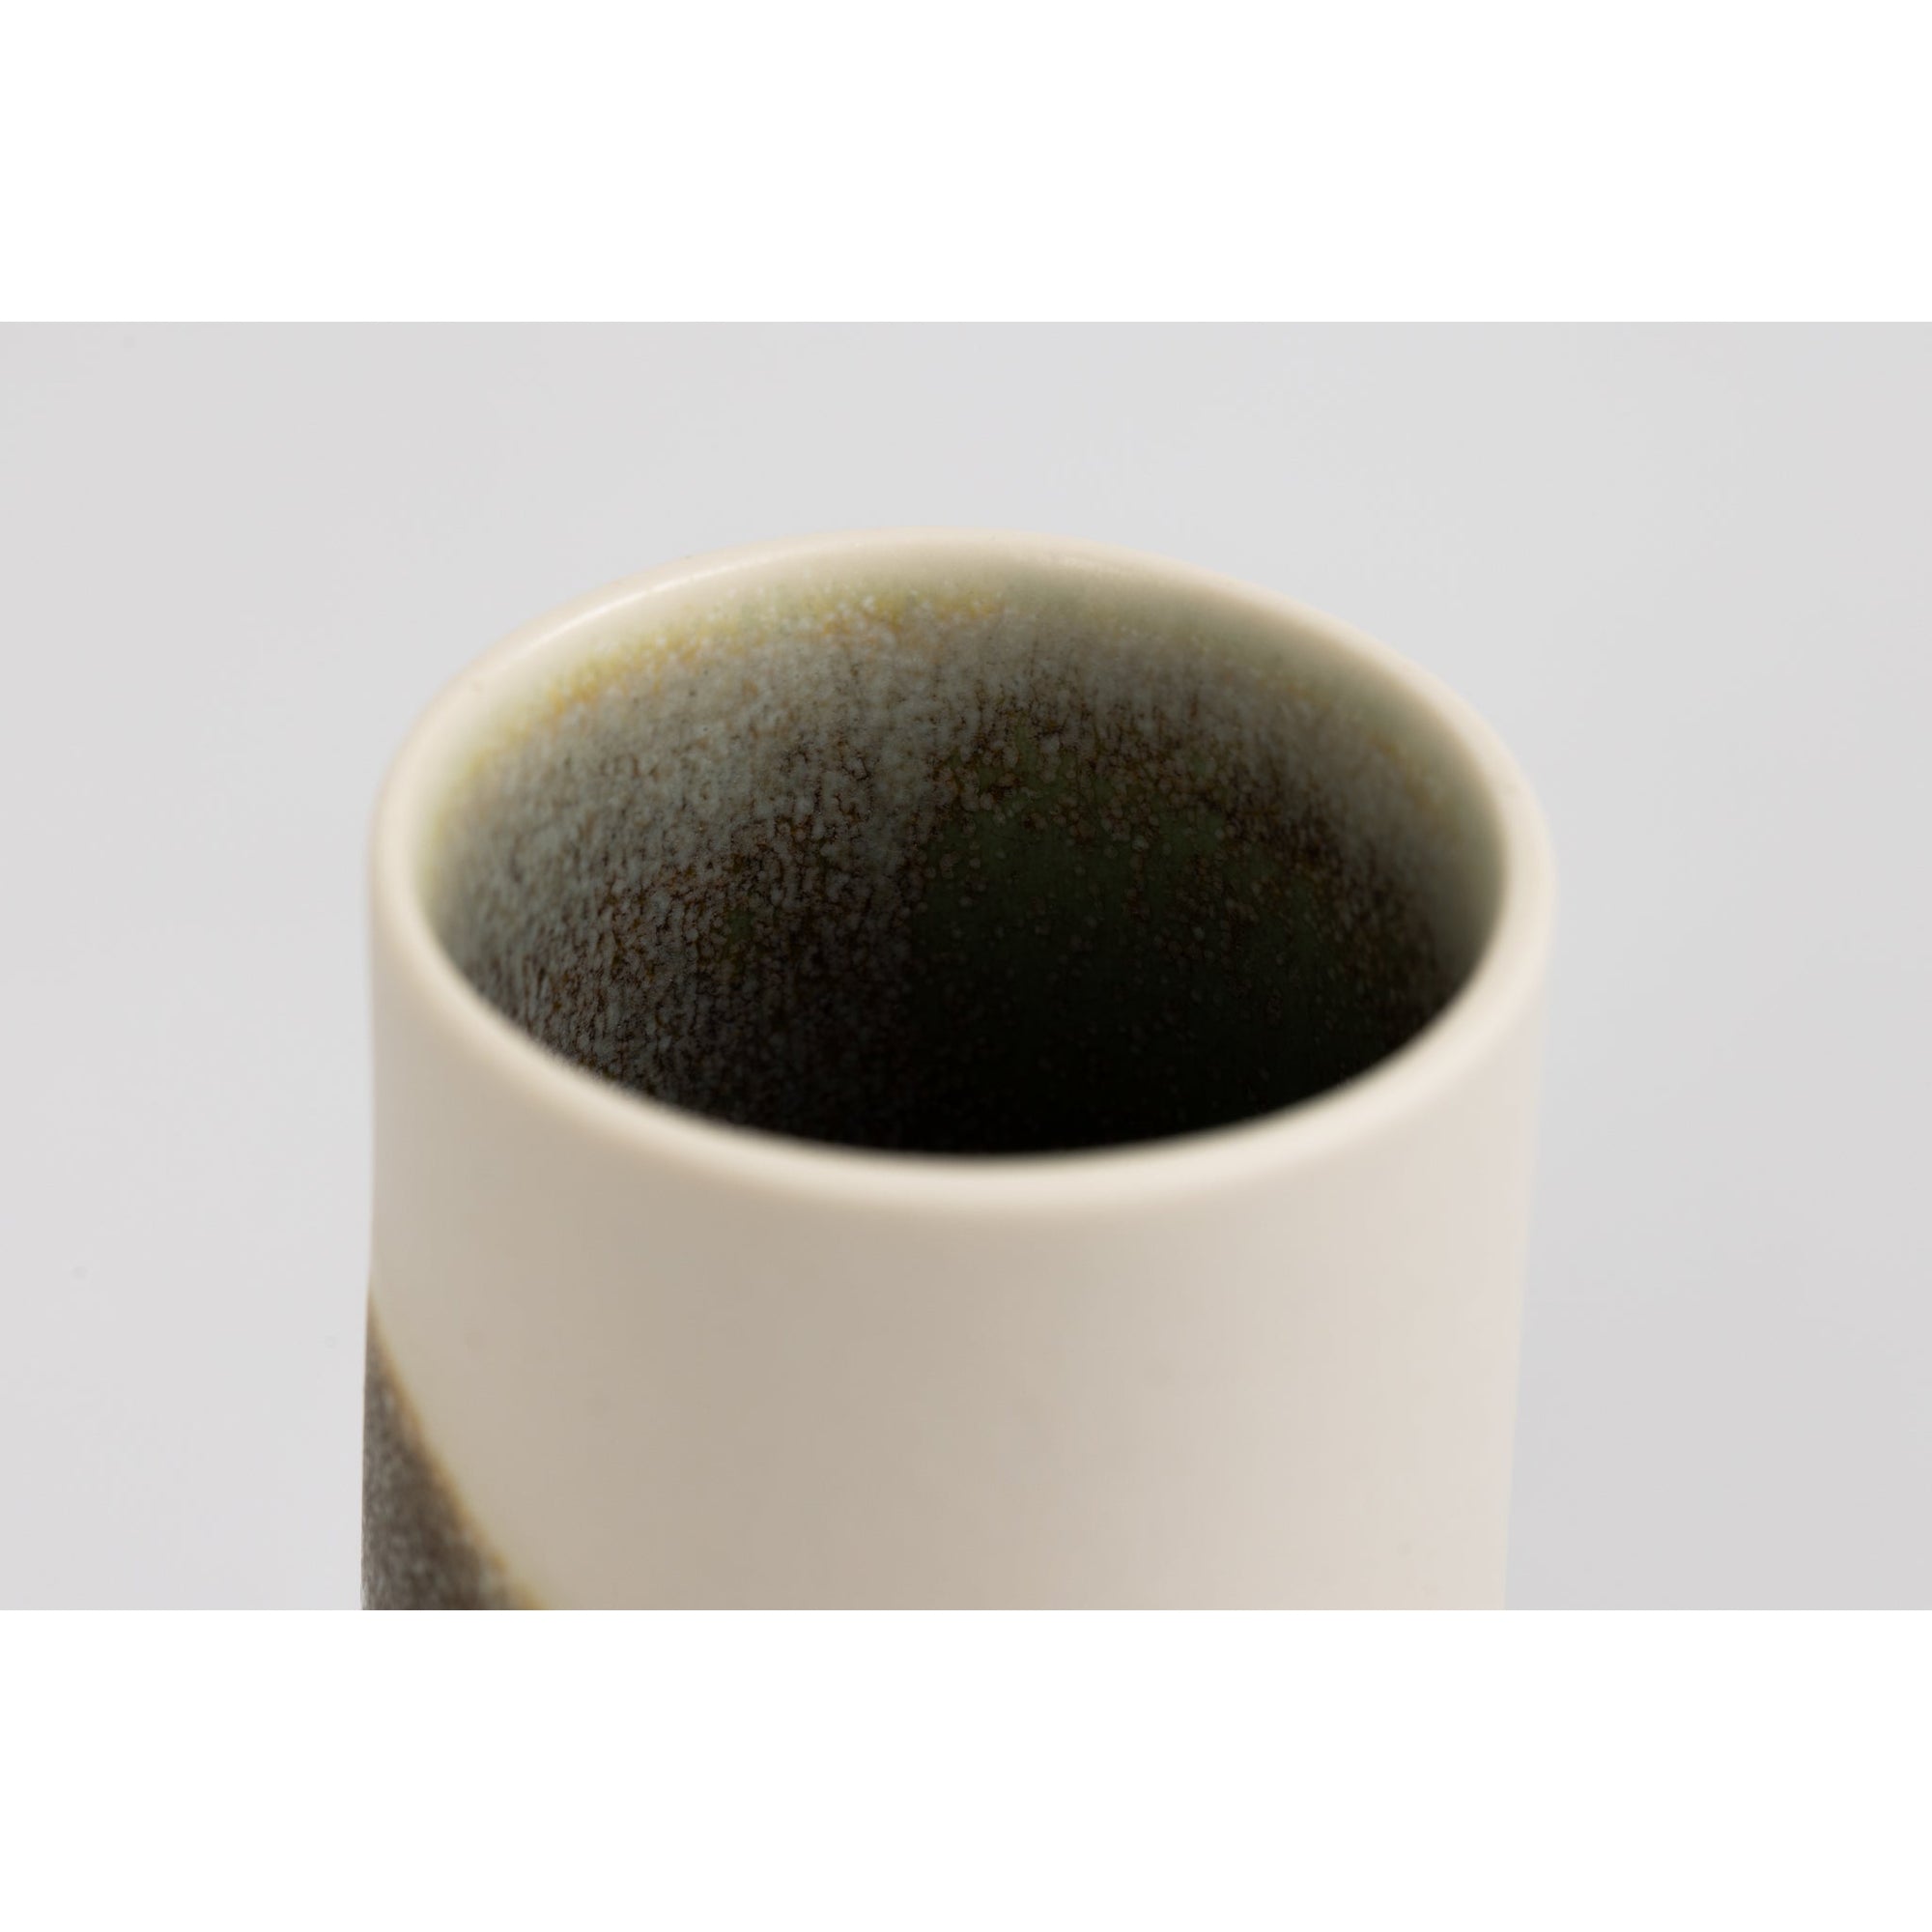 KSN3 South Downs III, Tapered Vessel by Kate Schuricht, available at Padstow Gallery, Cornwall